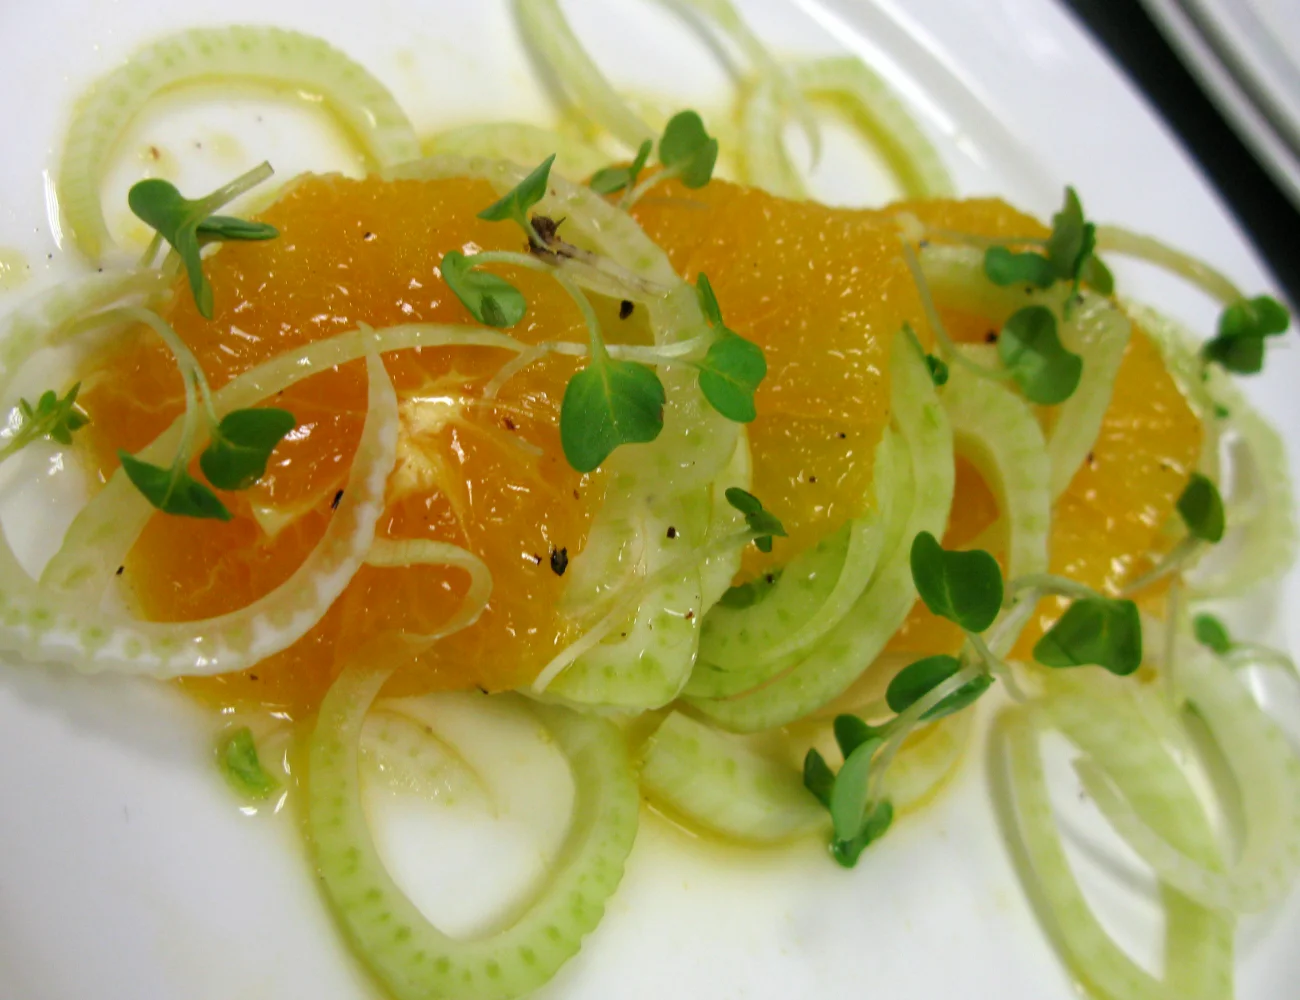 <a href="https://commons.wikimedia.org/wiki/File:Fennel_and_orange_salad.jpg">Jonathan</a>, <a href="https://creativecommons.org/licenses/by/2.0">CC BY 2.0</a>, via Wikimedia Commons